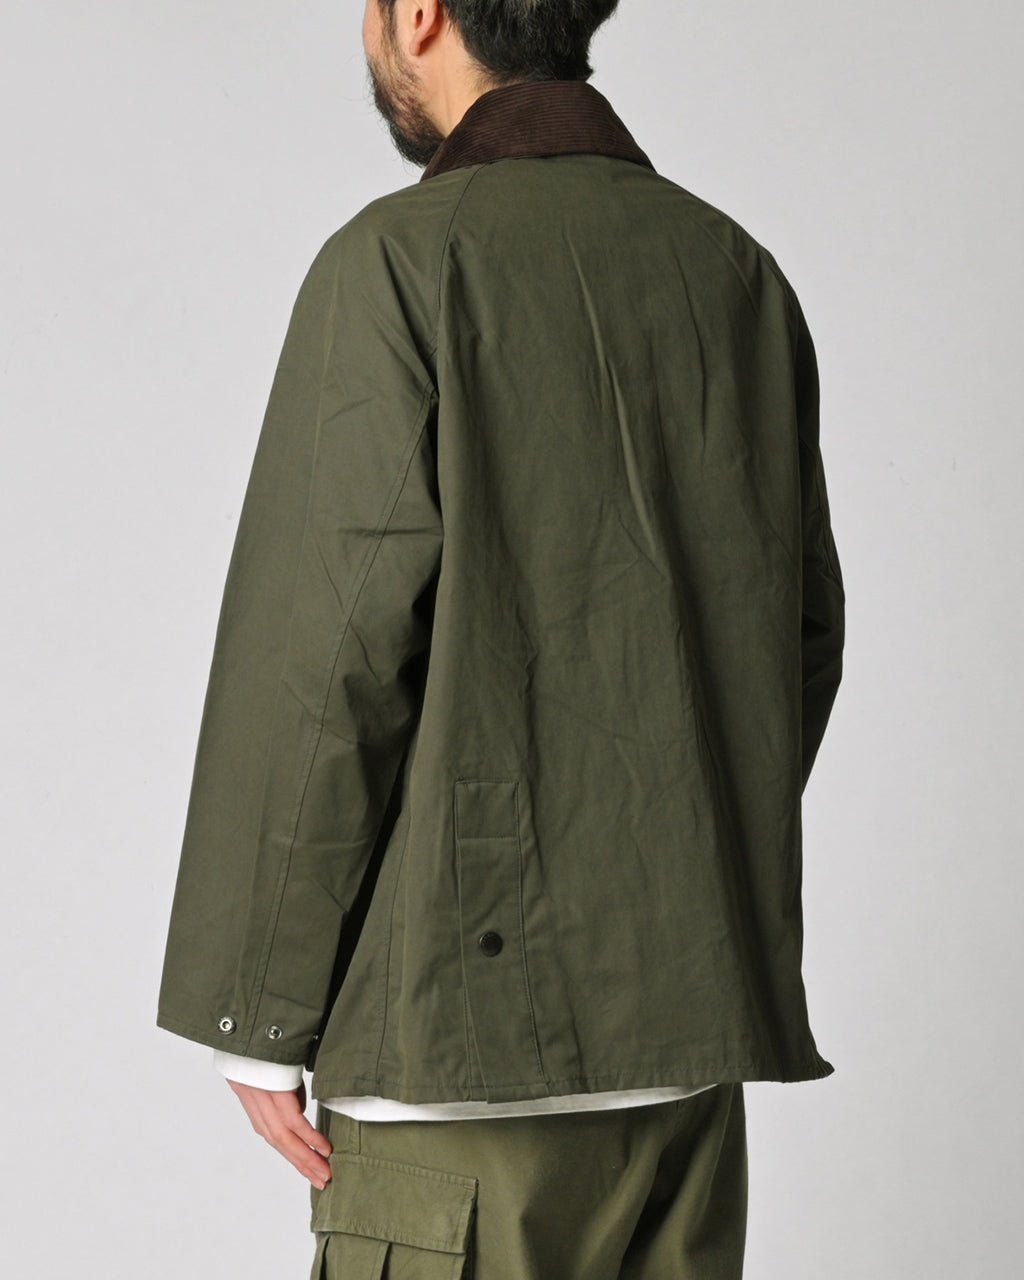 MWX1679(今週末まで限定値下げ)Barbour bedale OS 40新品未開封